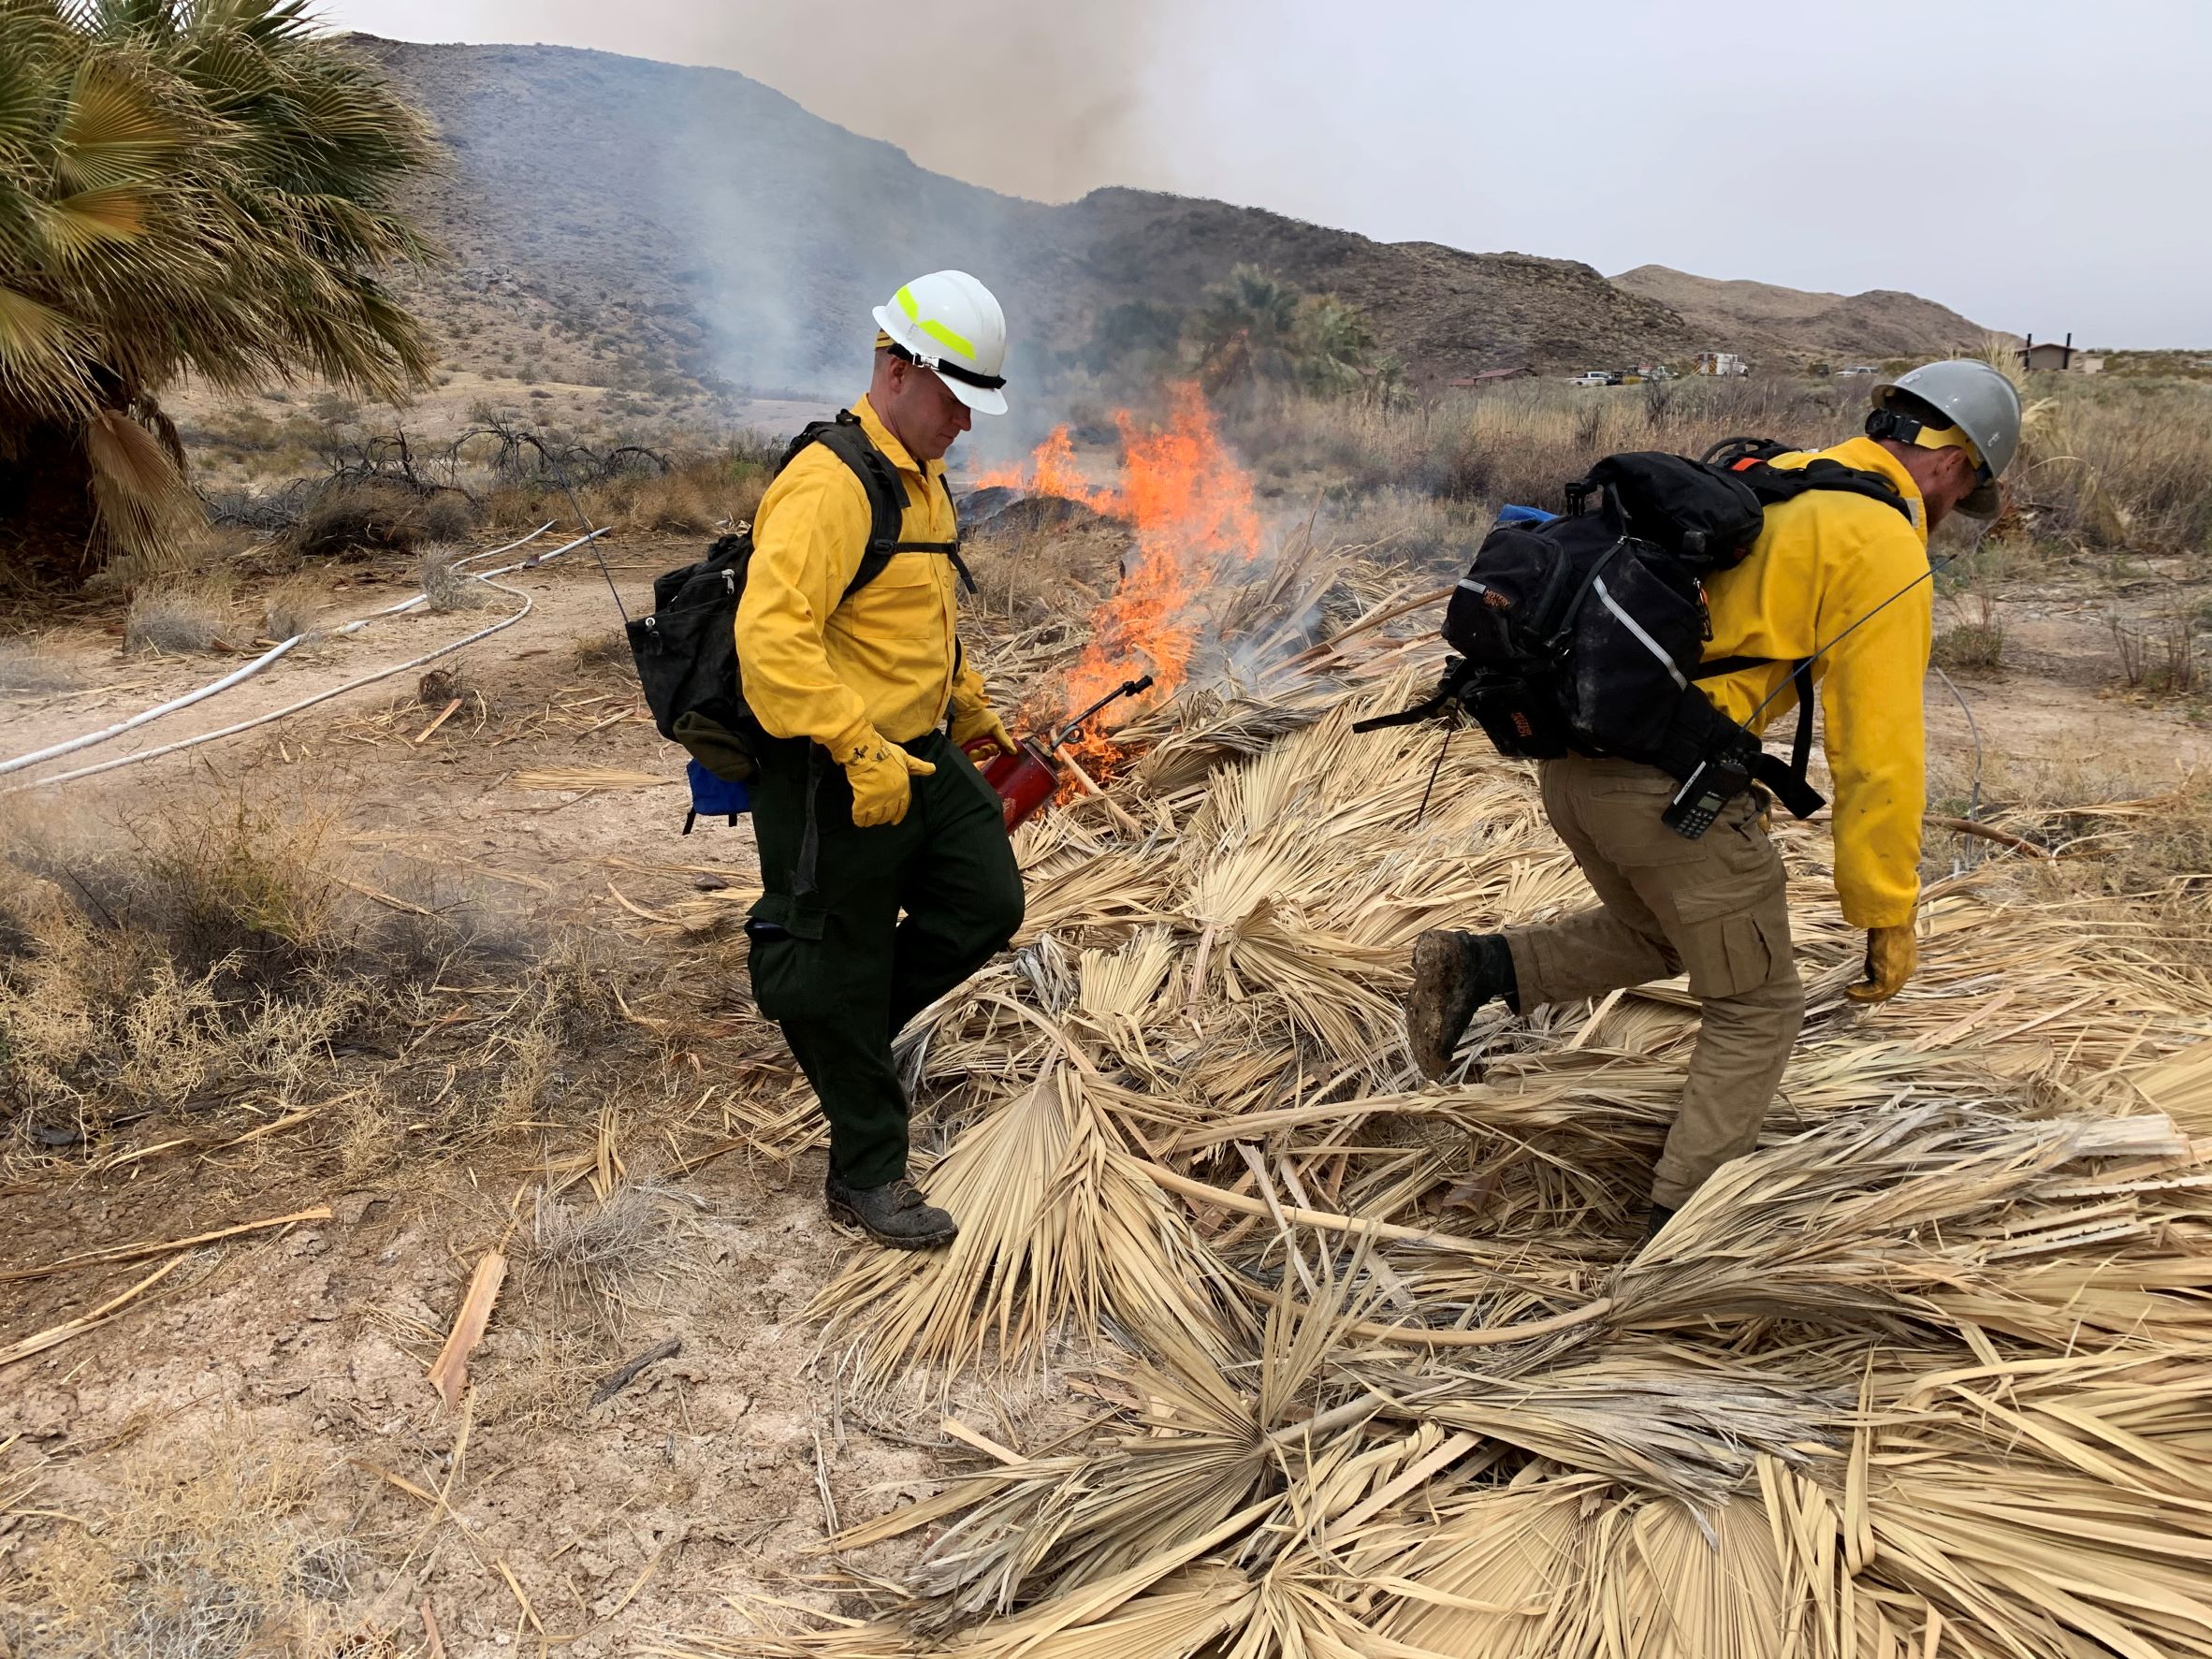 NPS TO CONDUCT PRESCRIBED BURN FOR HAZARDOUS FUEL REDUCTION THE WEEK OF JANUARY 16, 2023 - Lake Mead National Recreation Area (U.S. National Park Service)